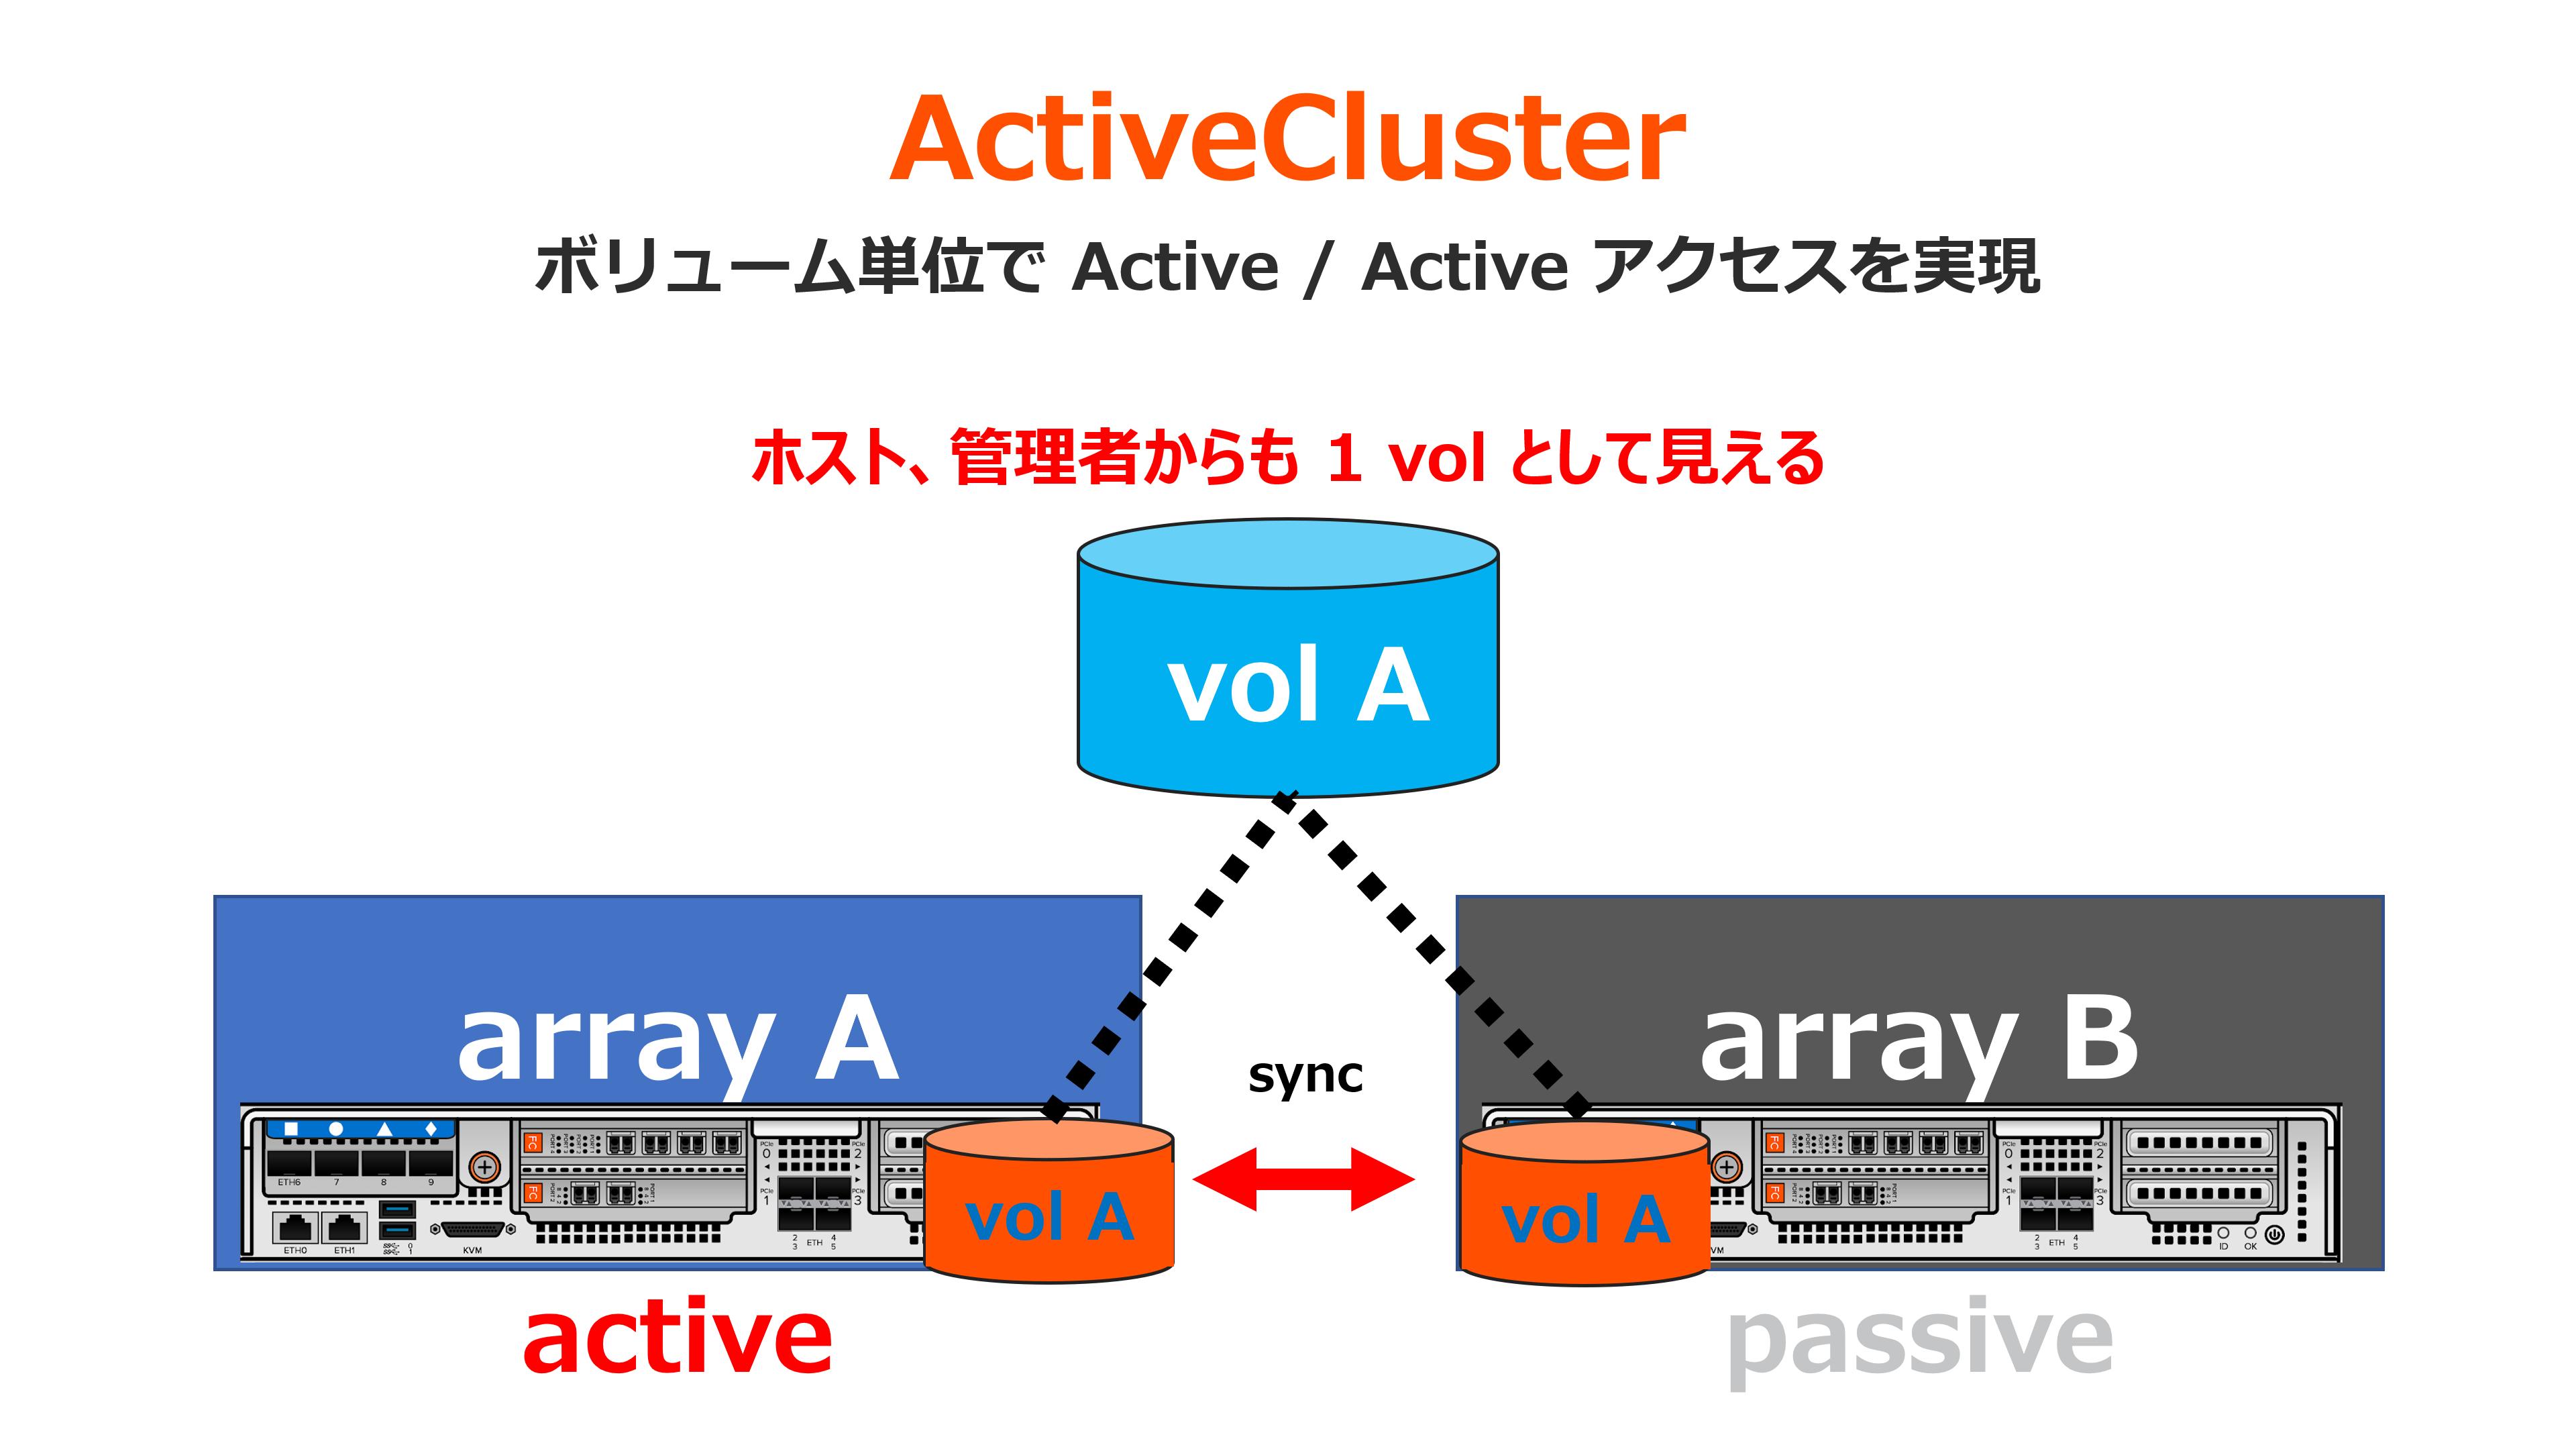 ActiveCluster